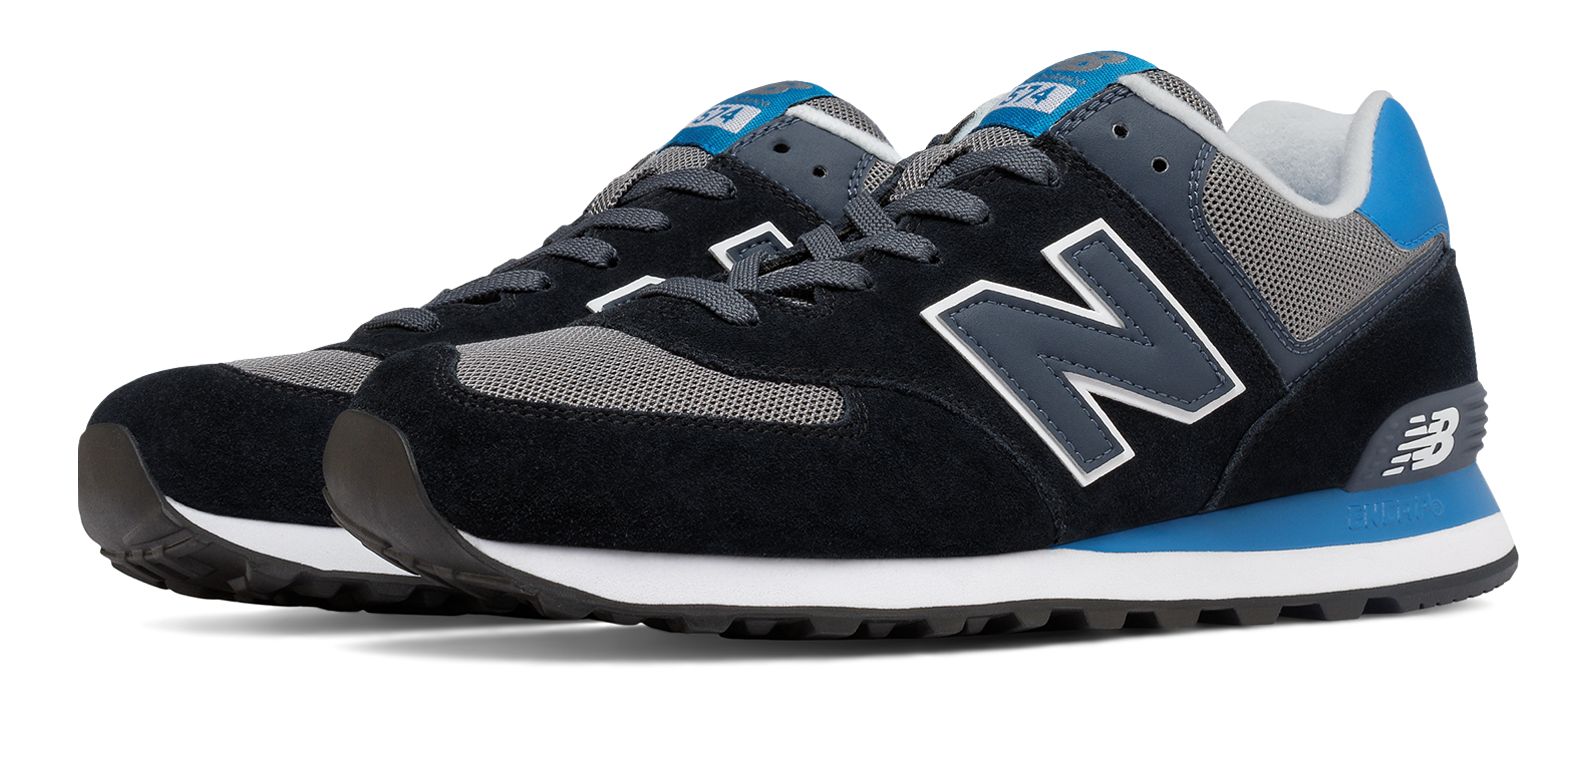 New Balance ML574-C on Sale - Discounts Up to 20% Off on ML574CPU at Joe's New  Balance Outlet